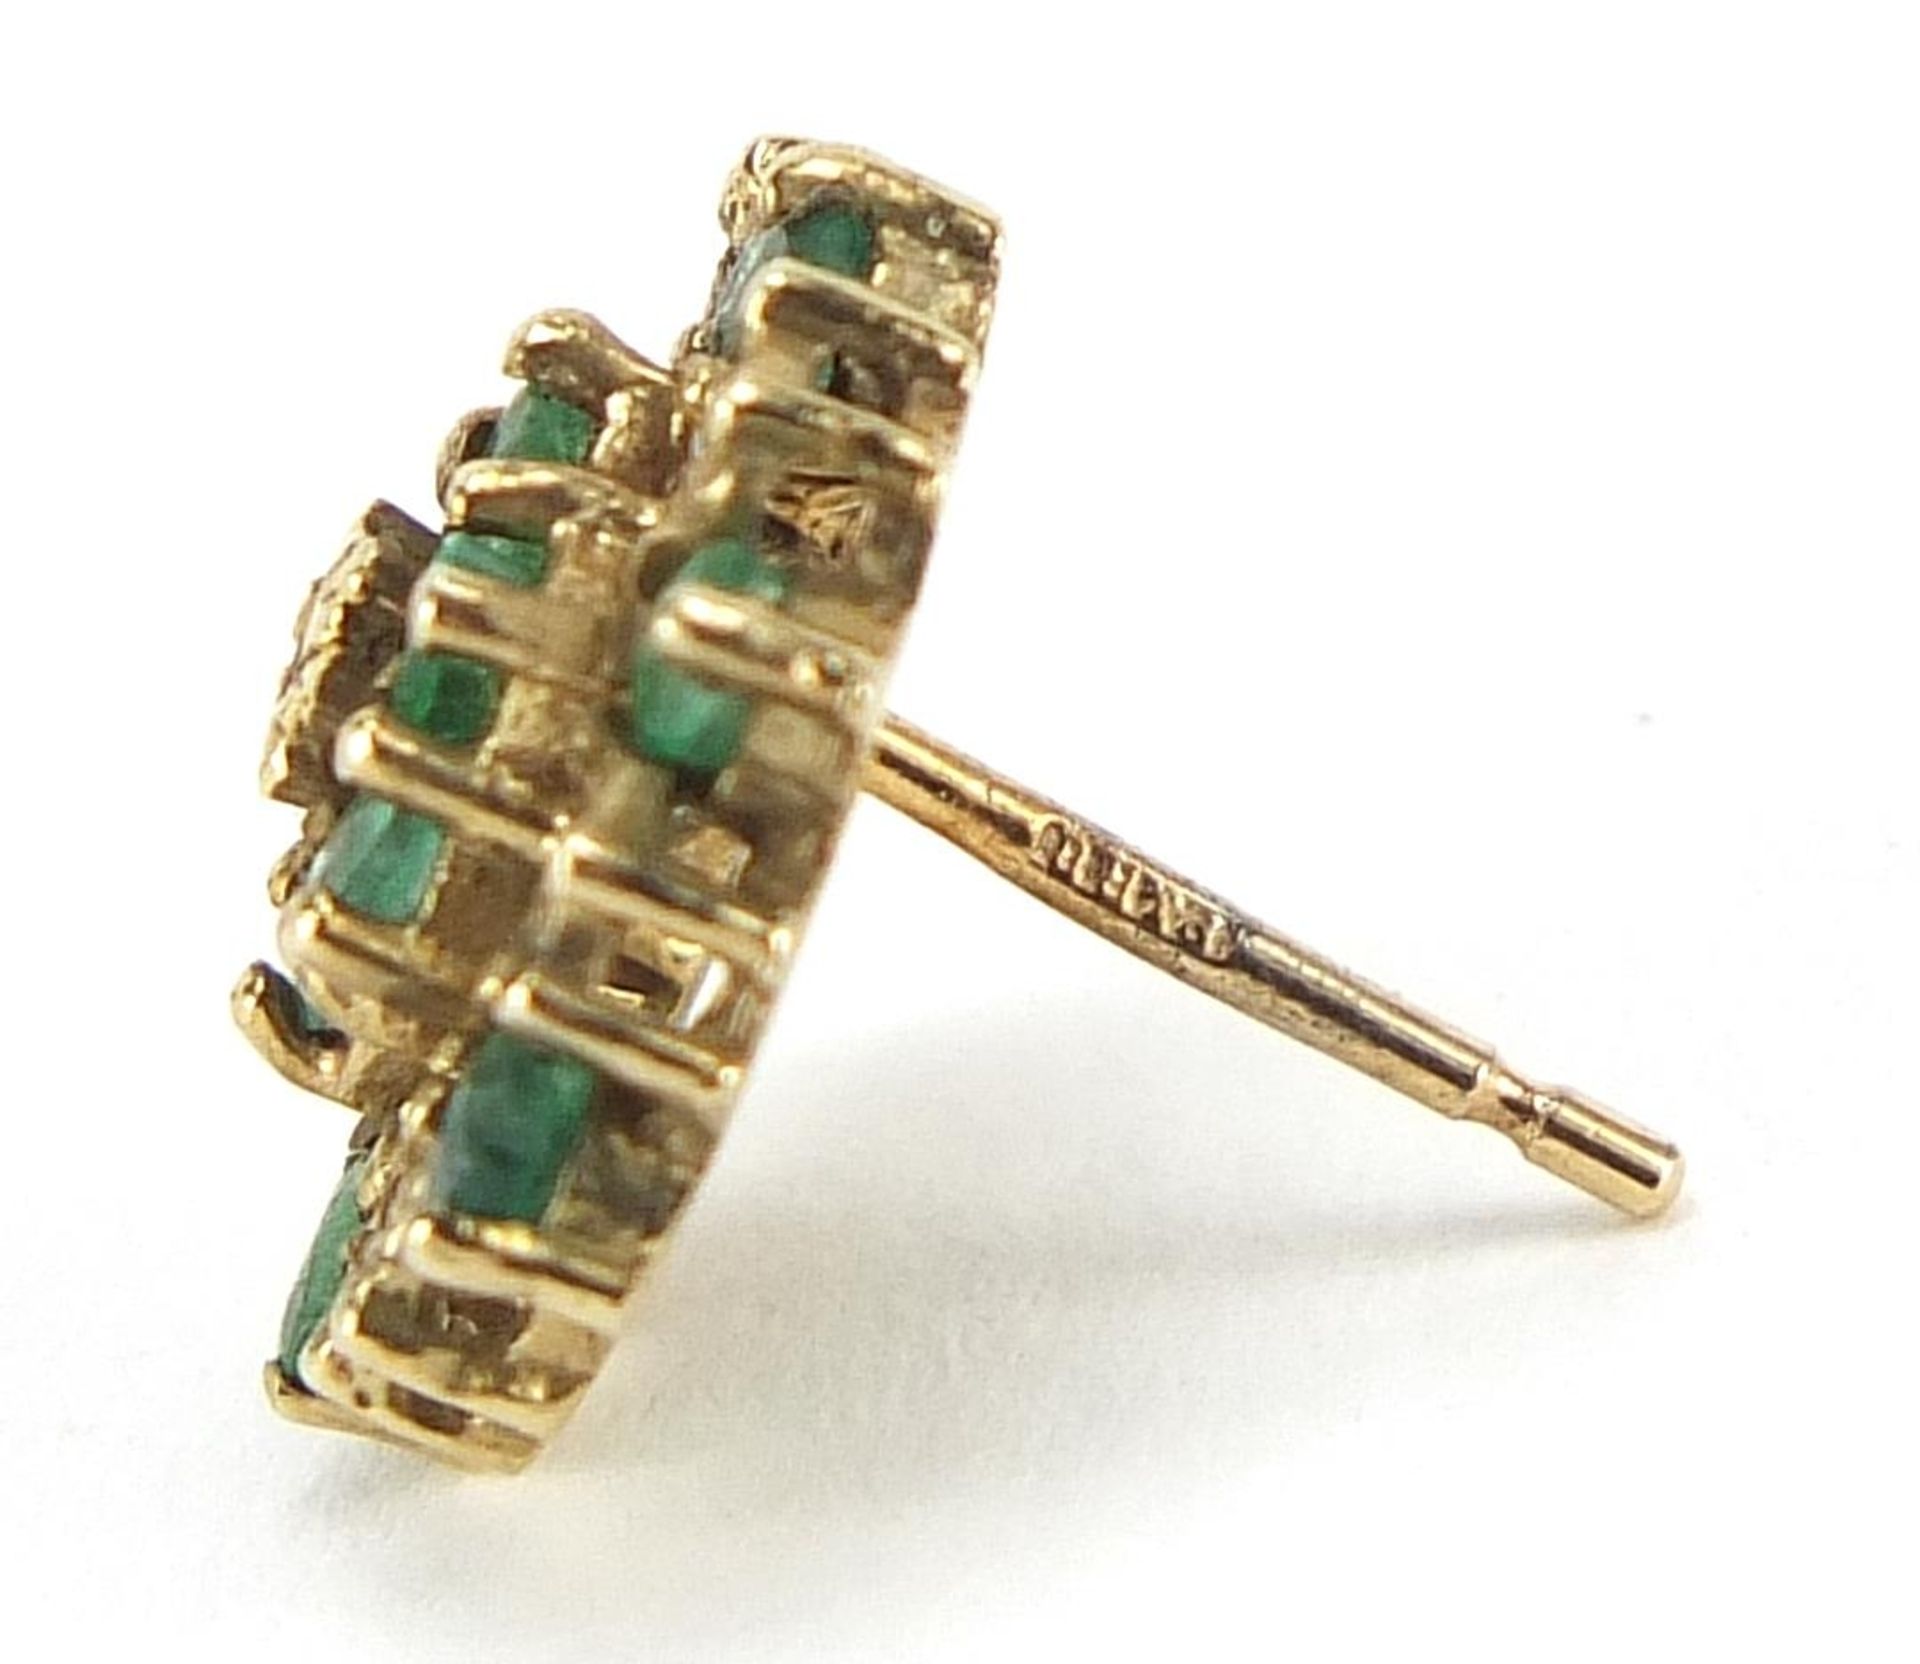 Pair of 9ct gold emerald and diamond cluster stud earrings, 1.2cm in diameter, 2.4g - Image 2 of 3